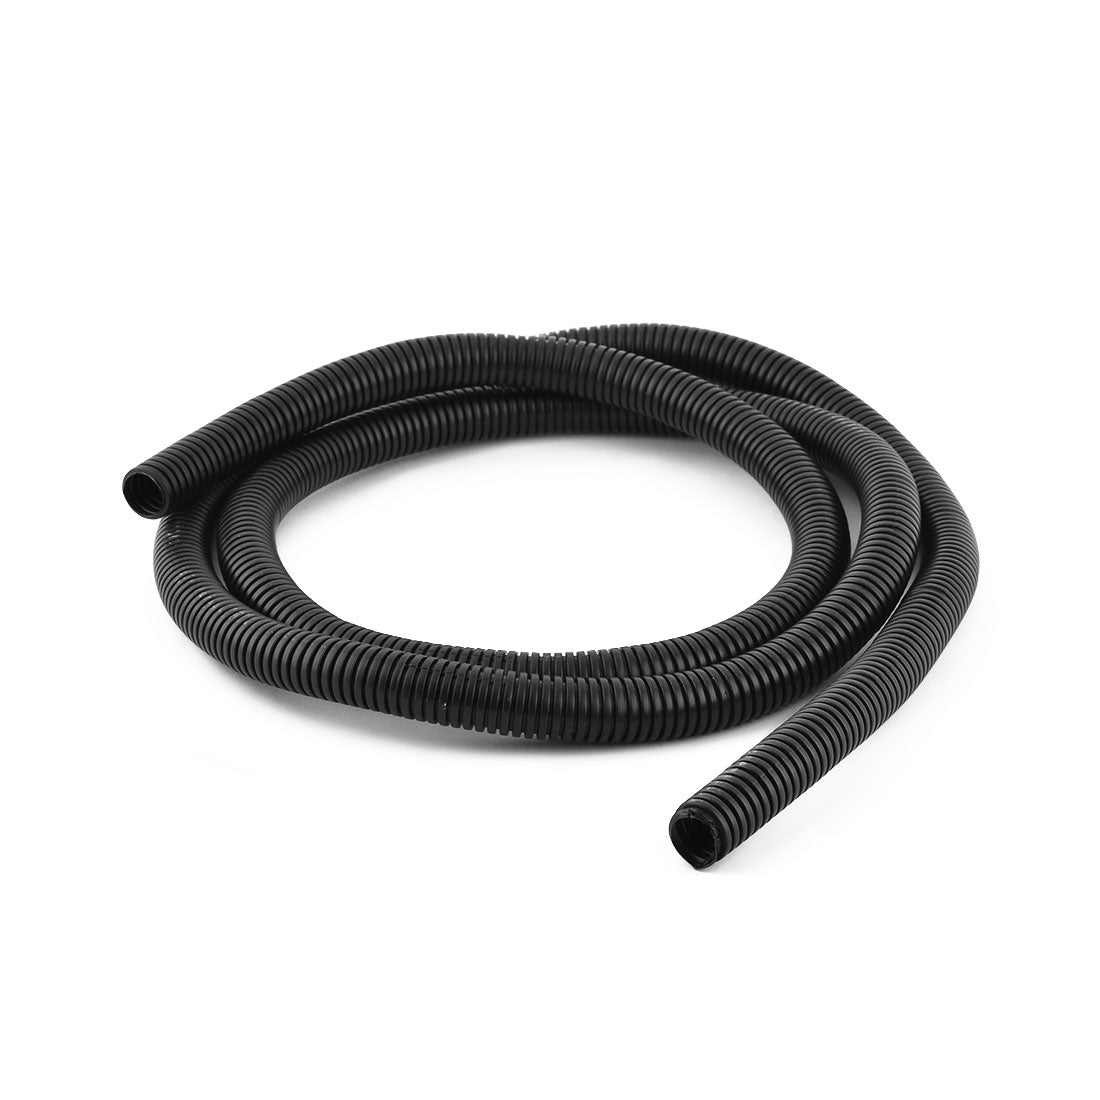 uxcell Uxcell 1.85 M 15 x 18 mm Plastic Corrugated Conduit Tube for Garden,Office Black